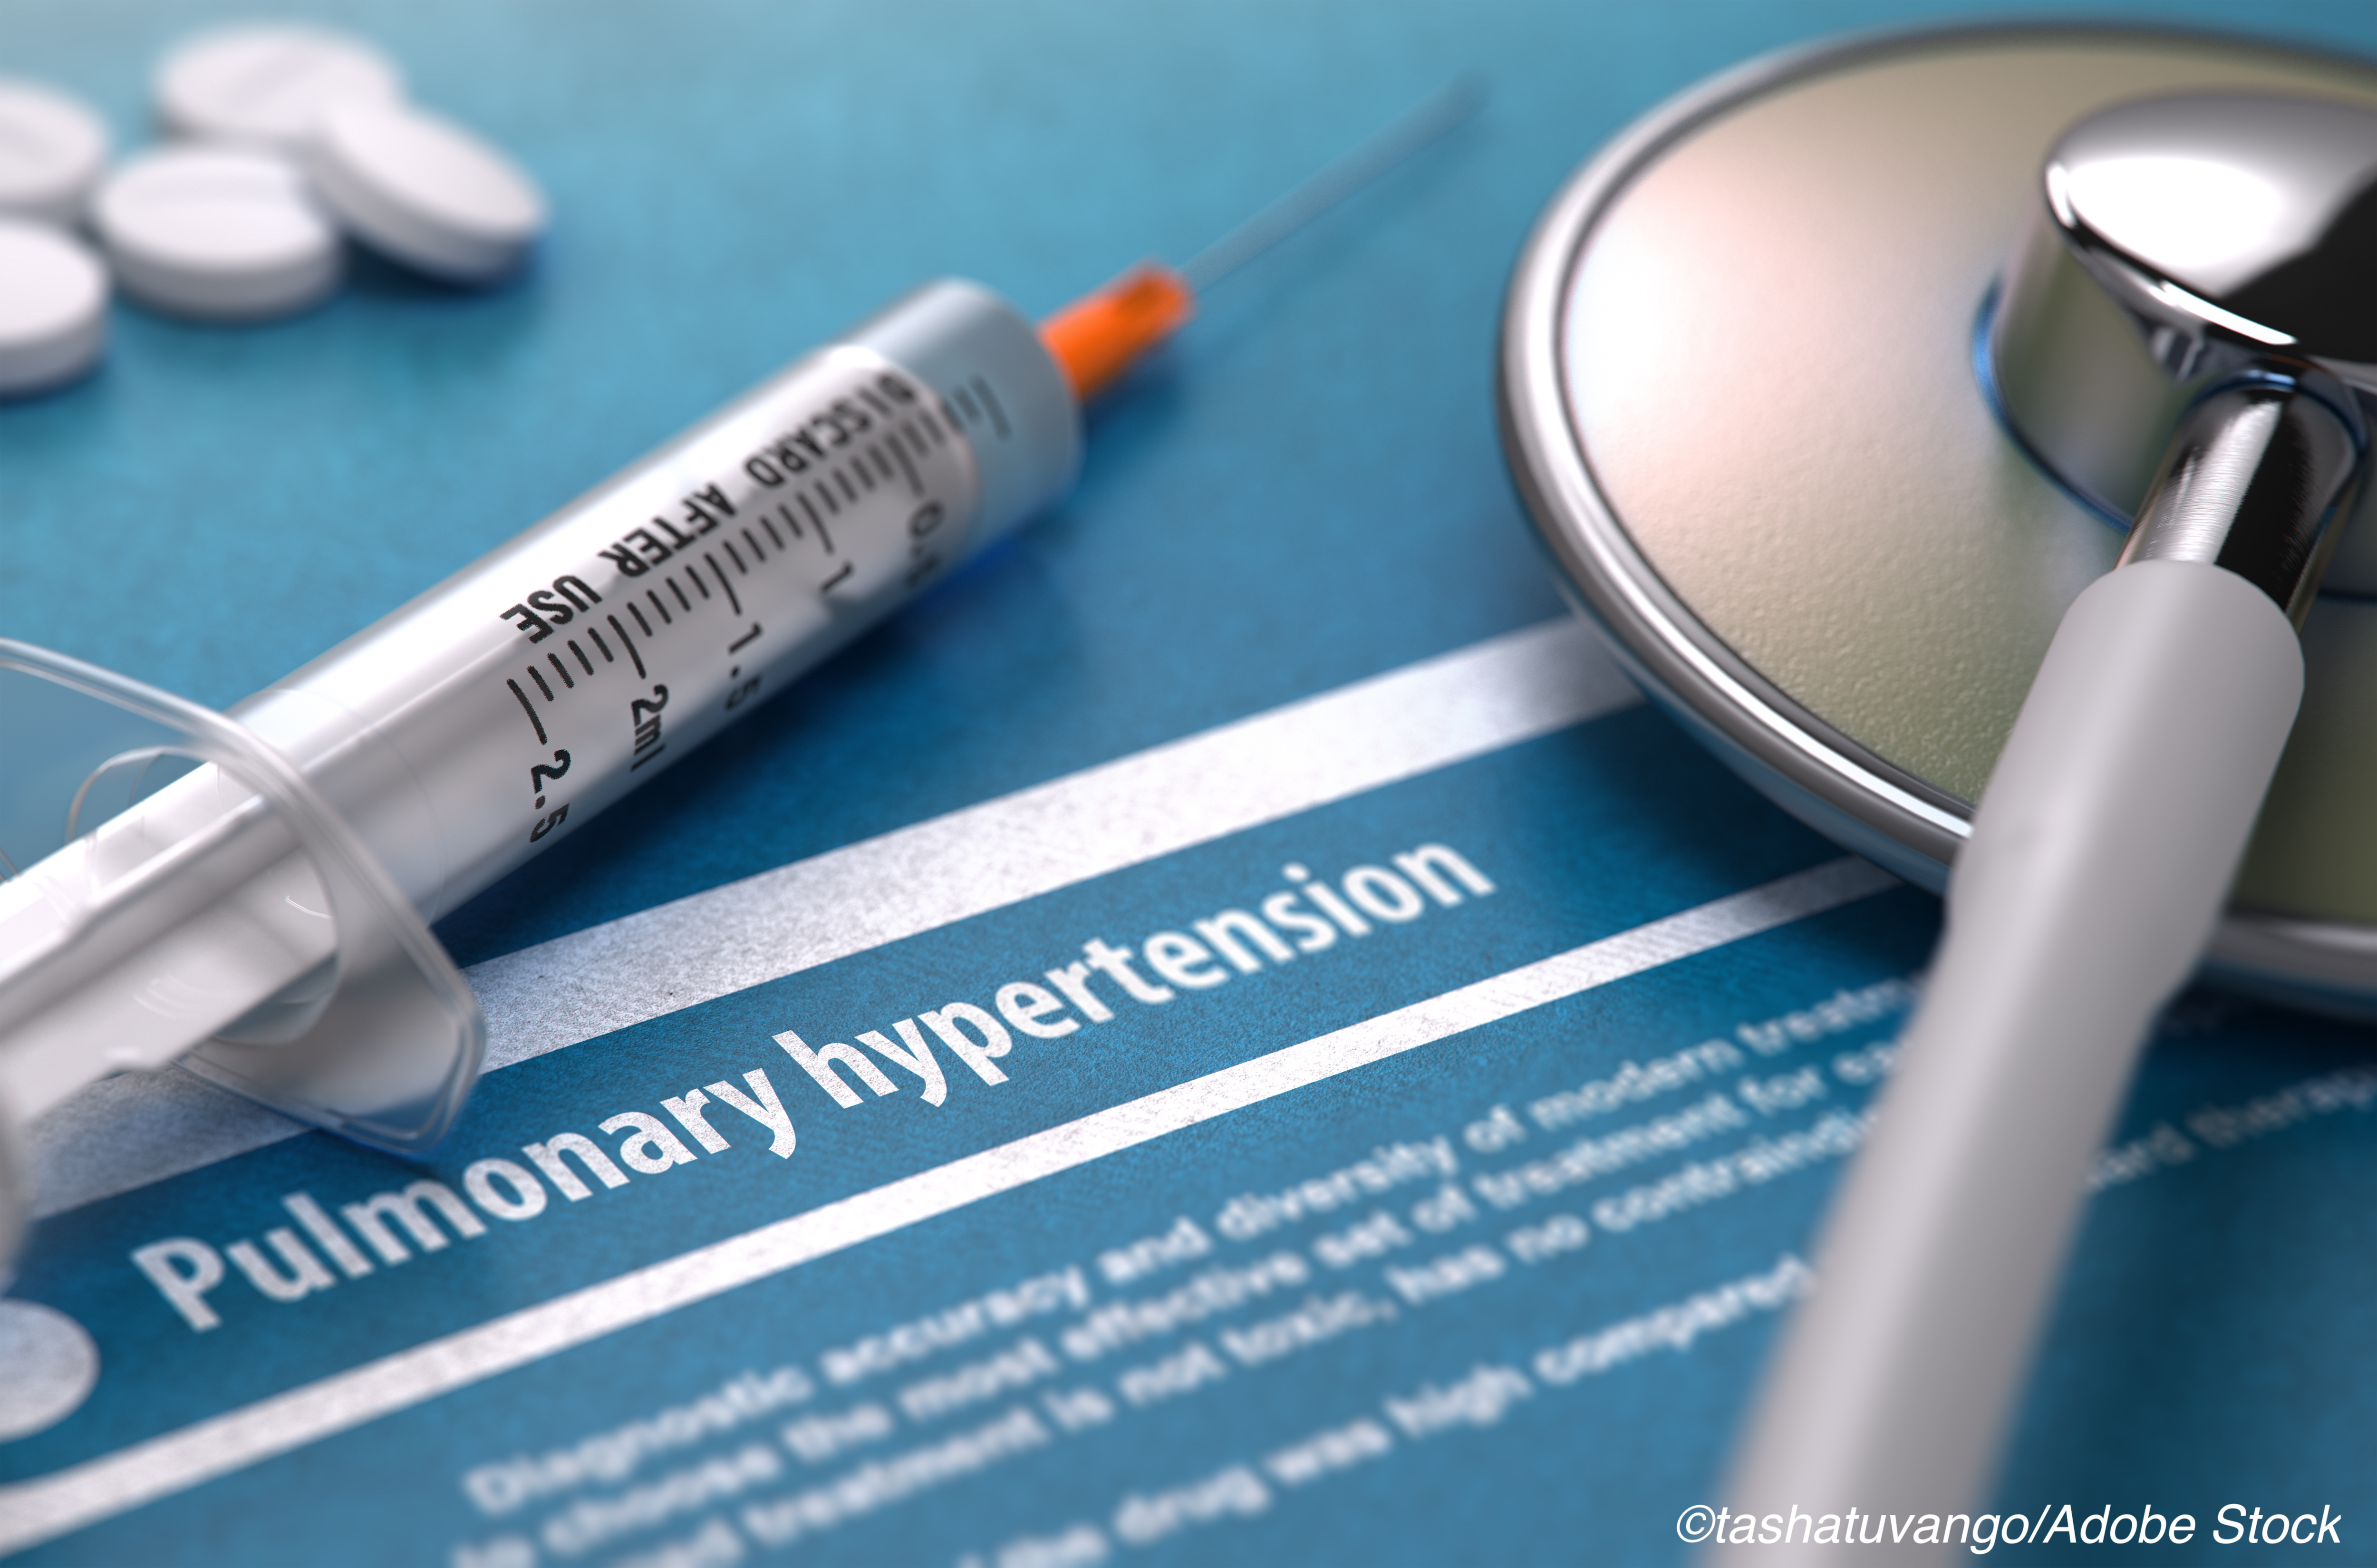 CHEST: Pulmonary Hypertension Increases Death Risk Among Hospitalized COPD Patients